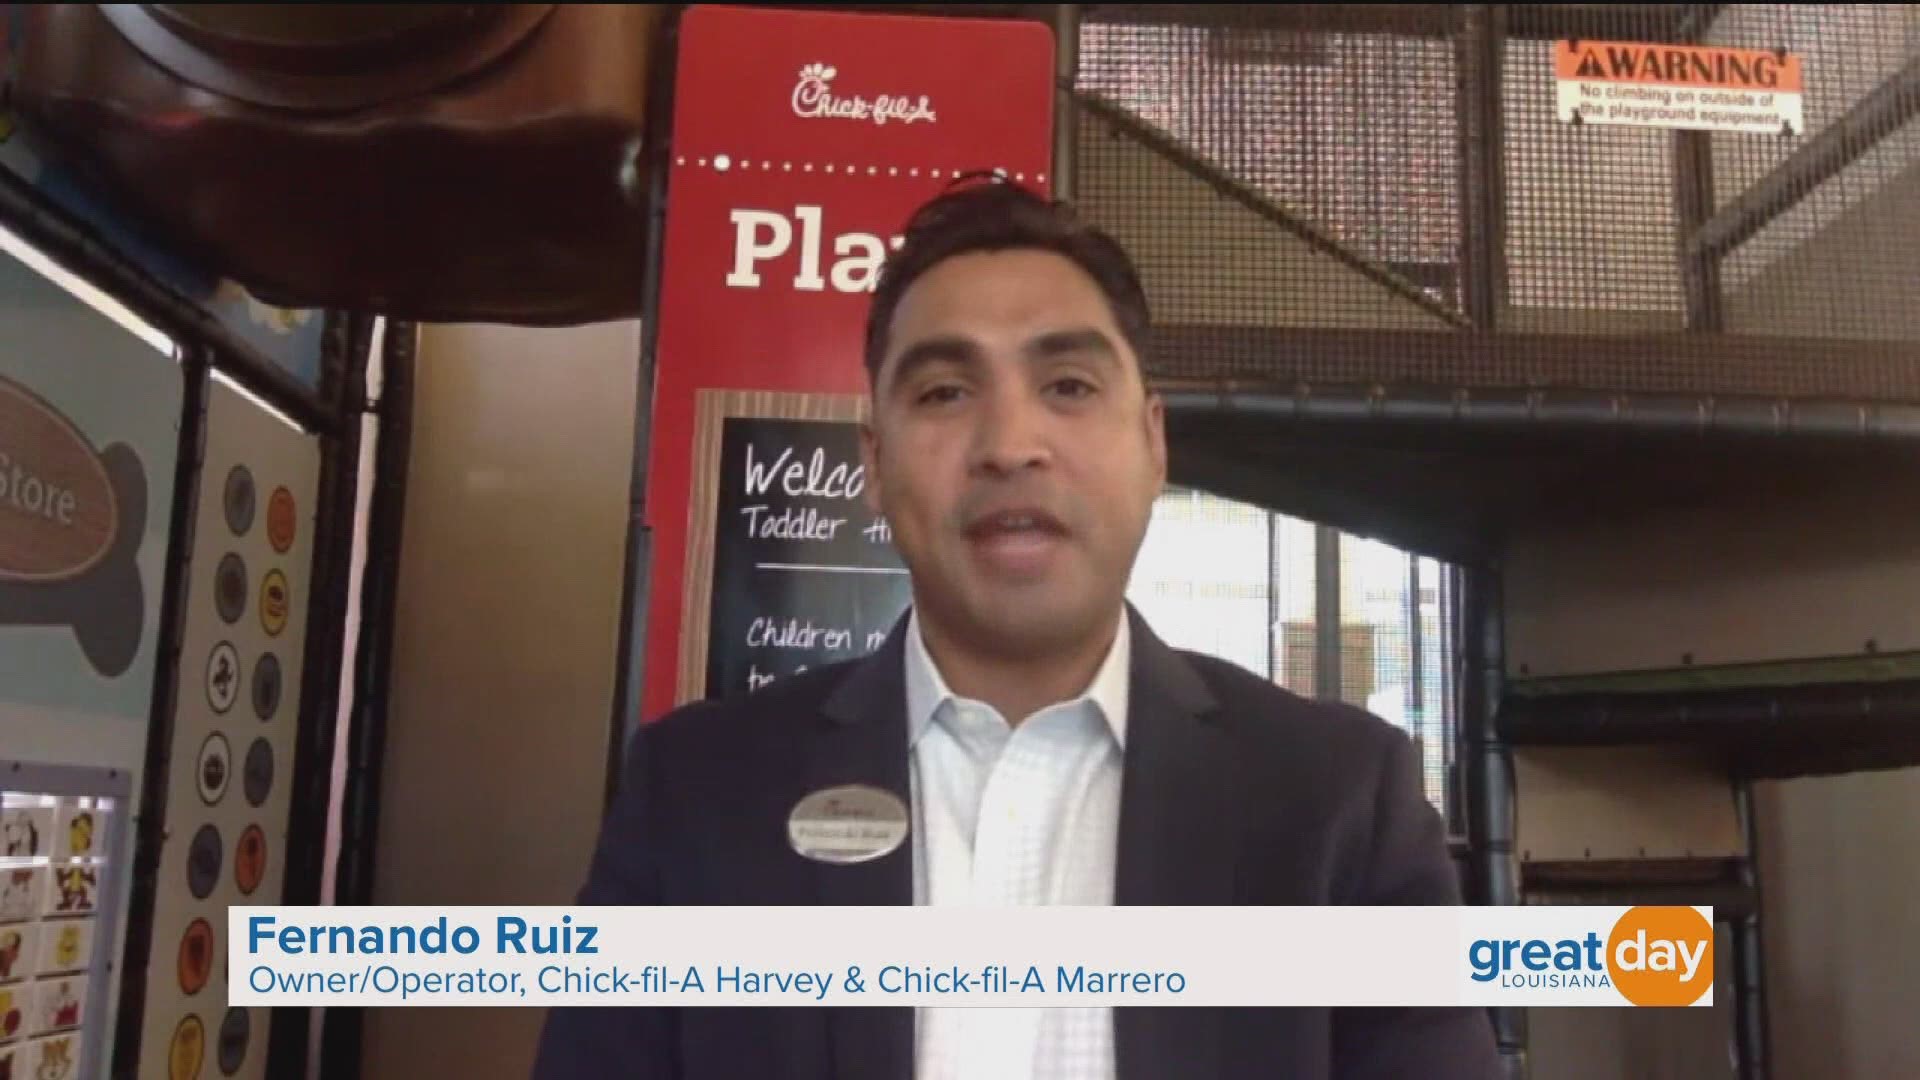 Chick-fil-A Owner/Operator Fernando Ruiz, shares his community ties near his two locations in Harvey and Marrero. To learn more, visit chick-fil-a.com